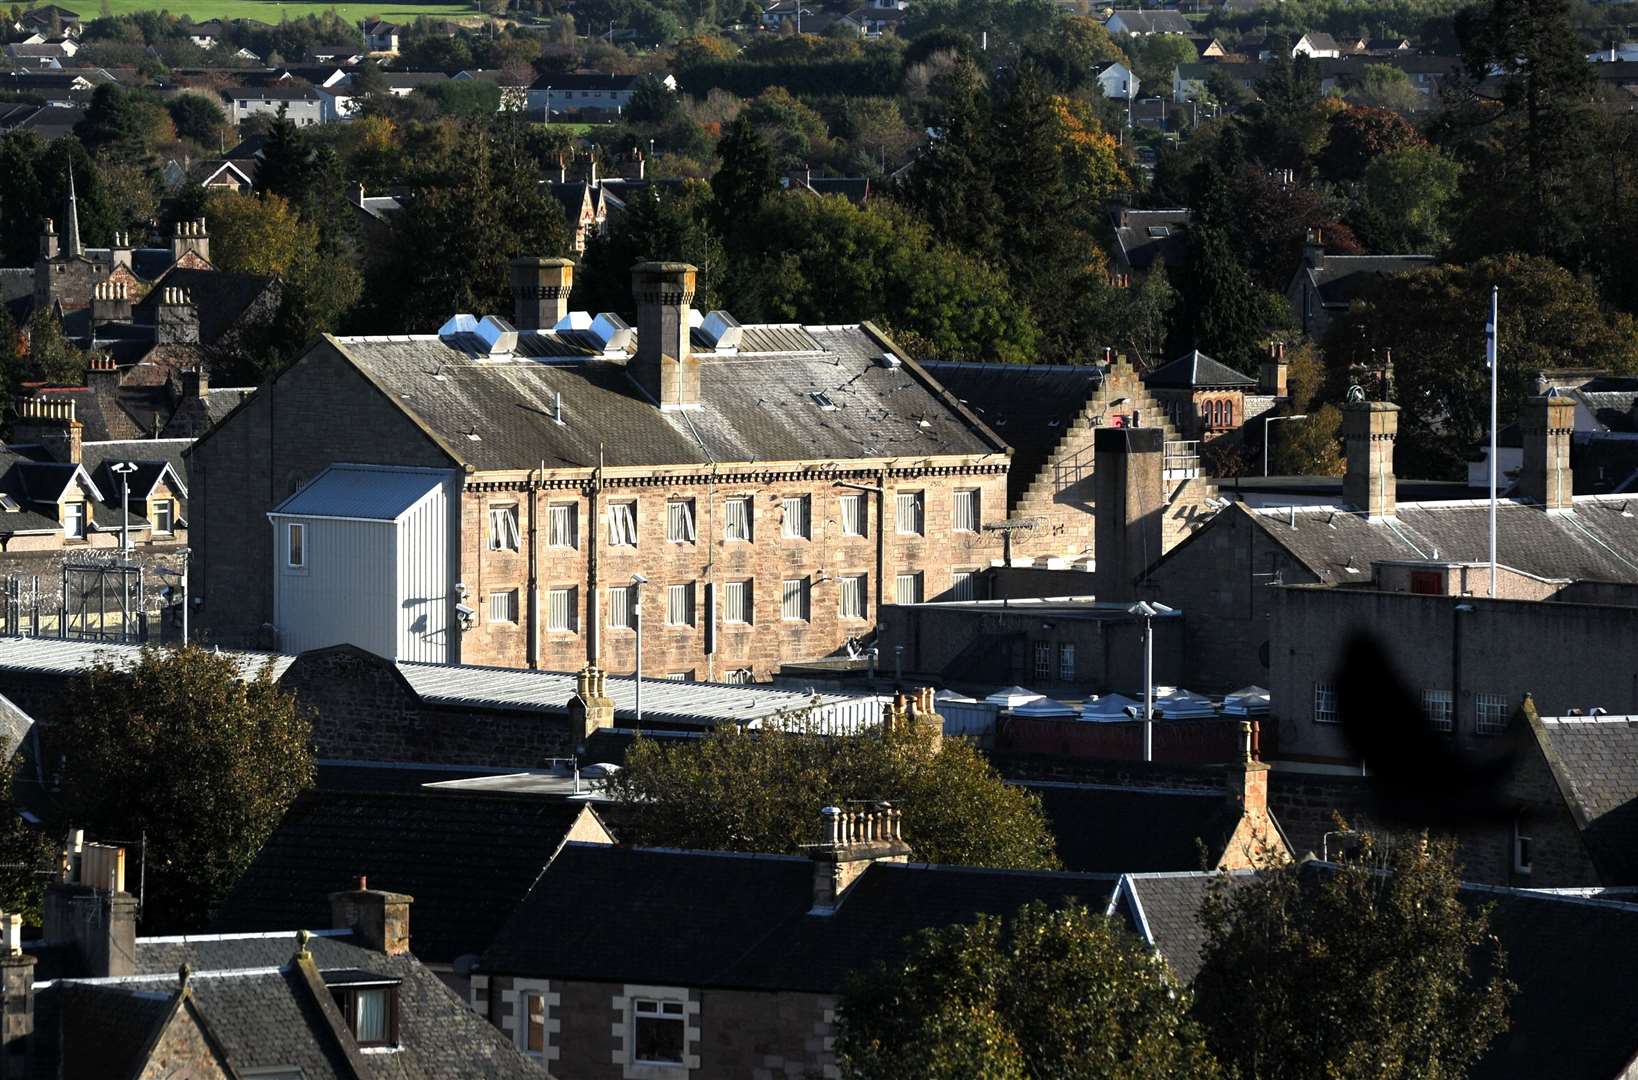 Inverness Prison sits amid housing.